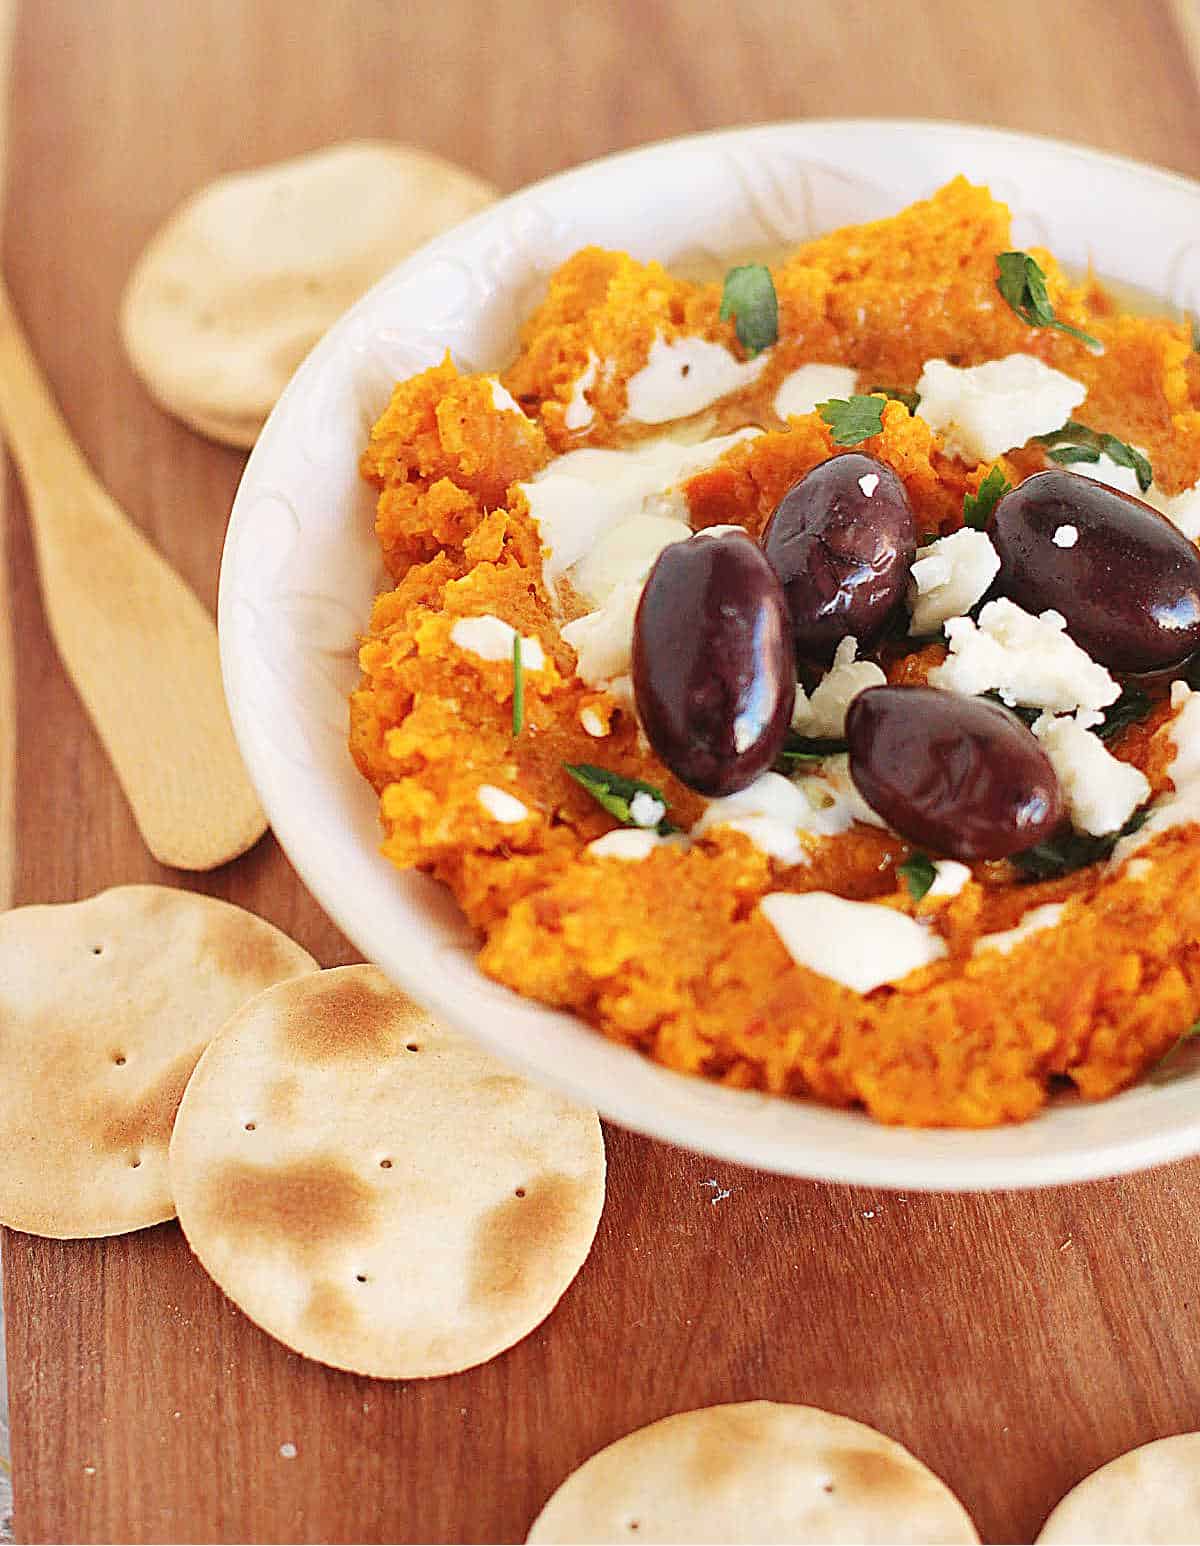 Bowl of carrot dip, black olives, goat cheese and crackers.